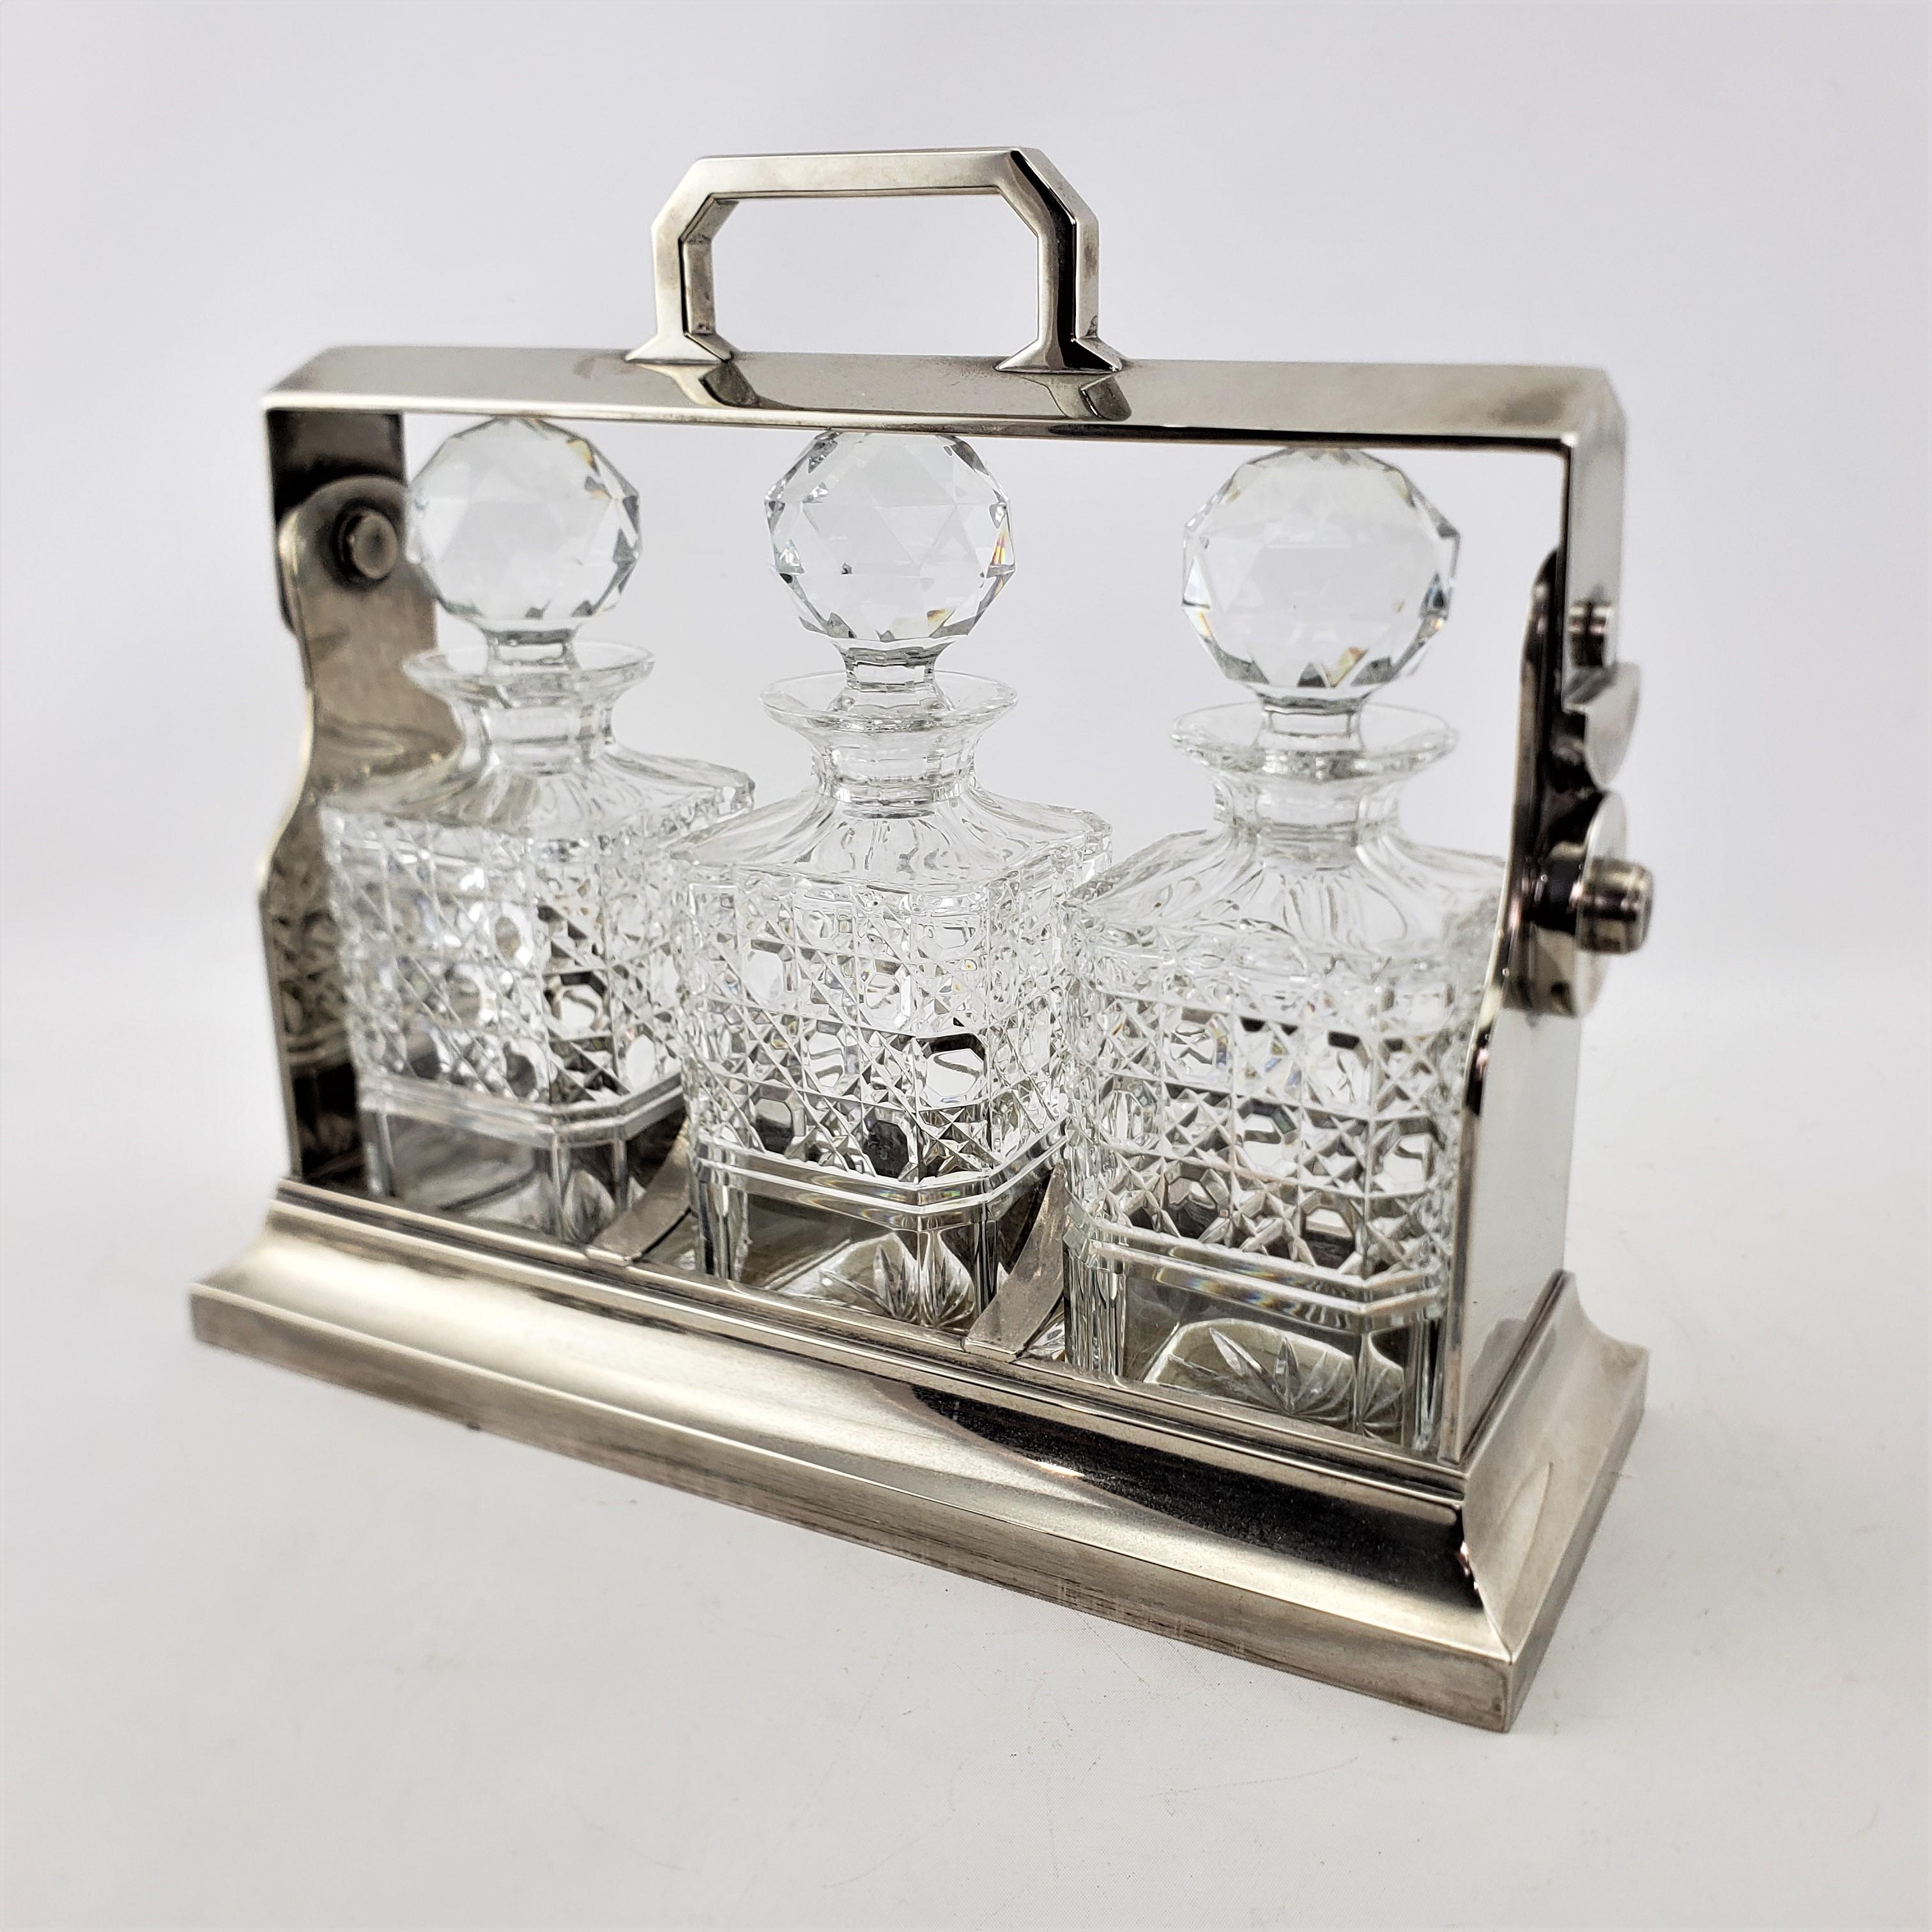 Hand-Crafted Antique Edwardian English Silver Plated & Cut Crystal 3 Bottle Tantalus and Key